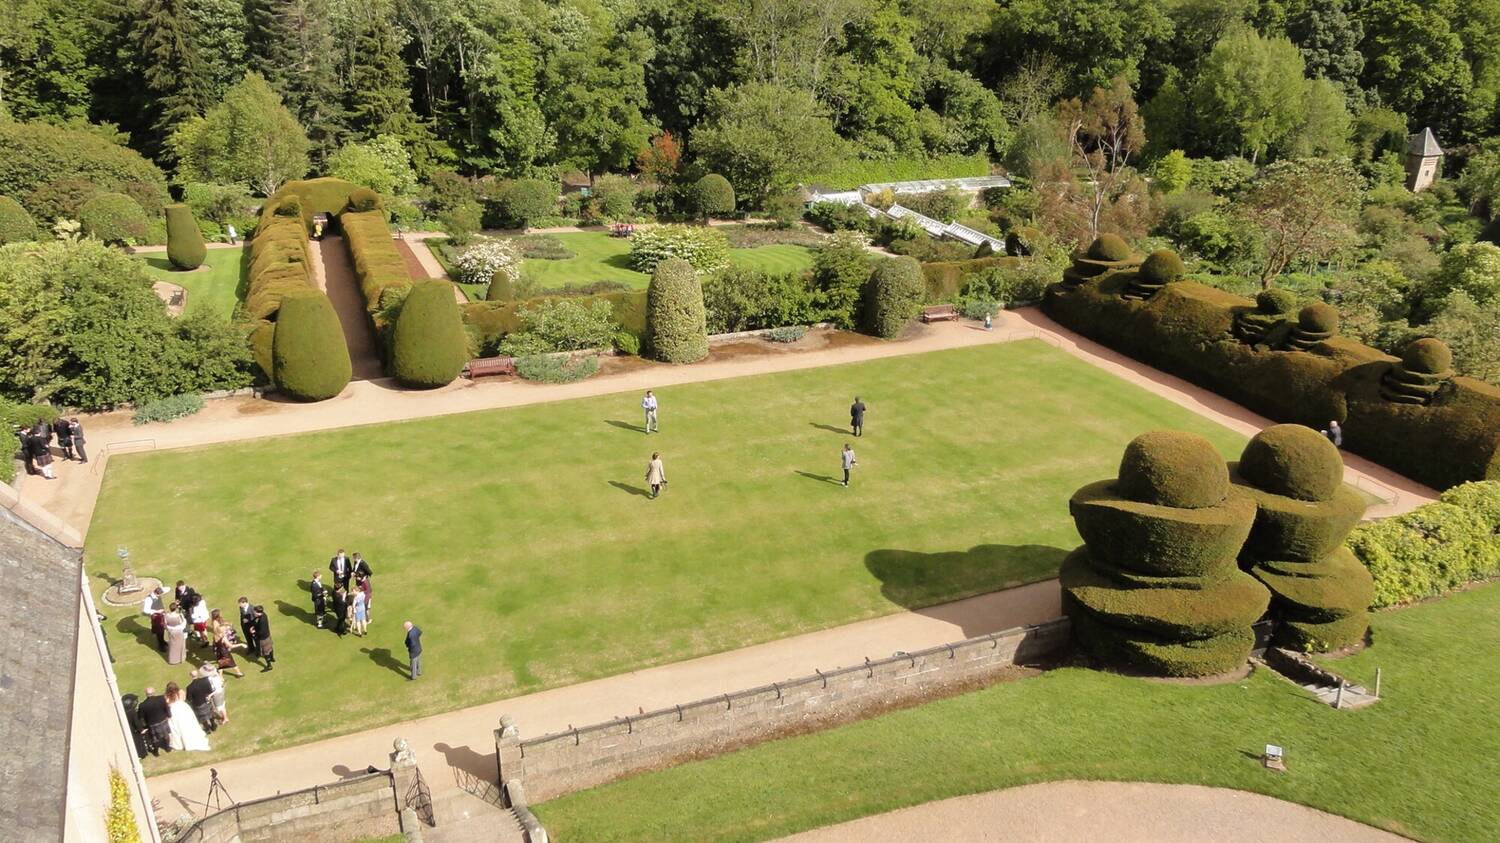 Bird’s-eye view looking down on a lawn with large topiary yew hedges to the right.